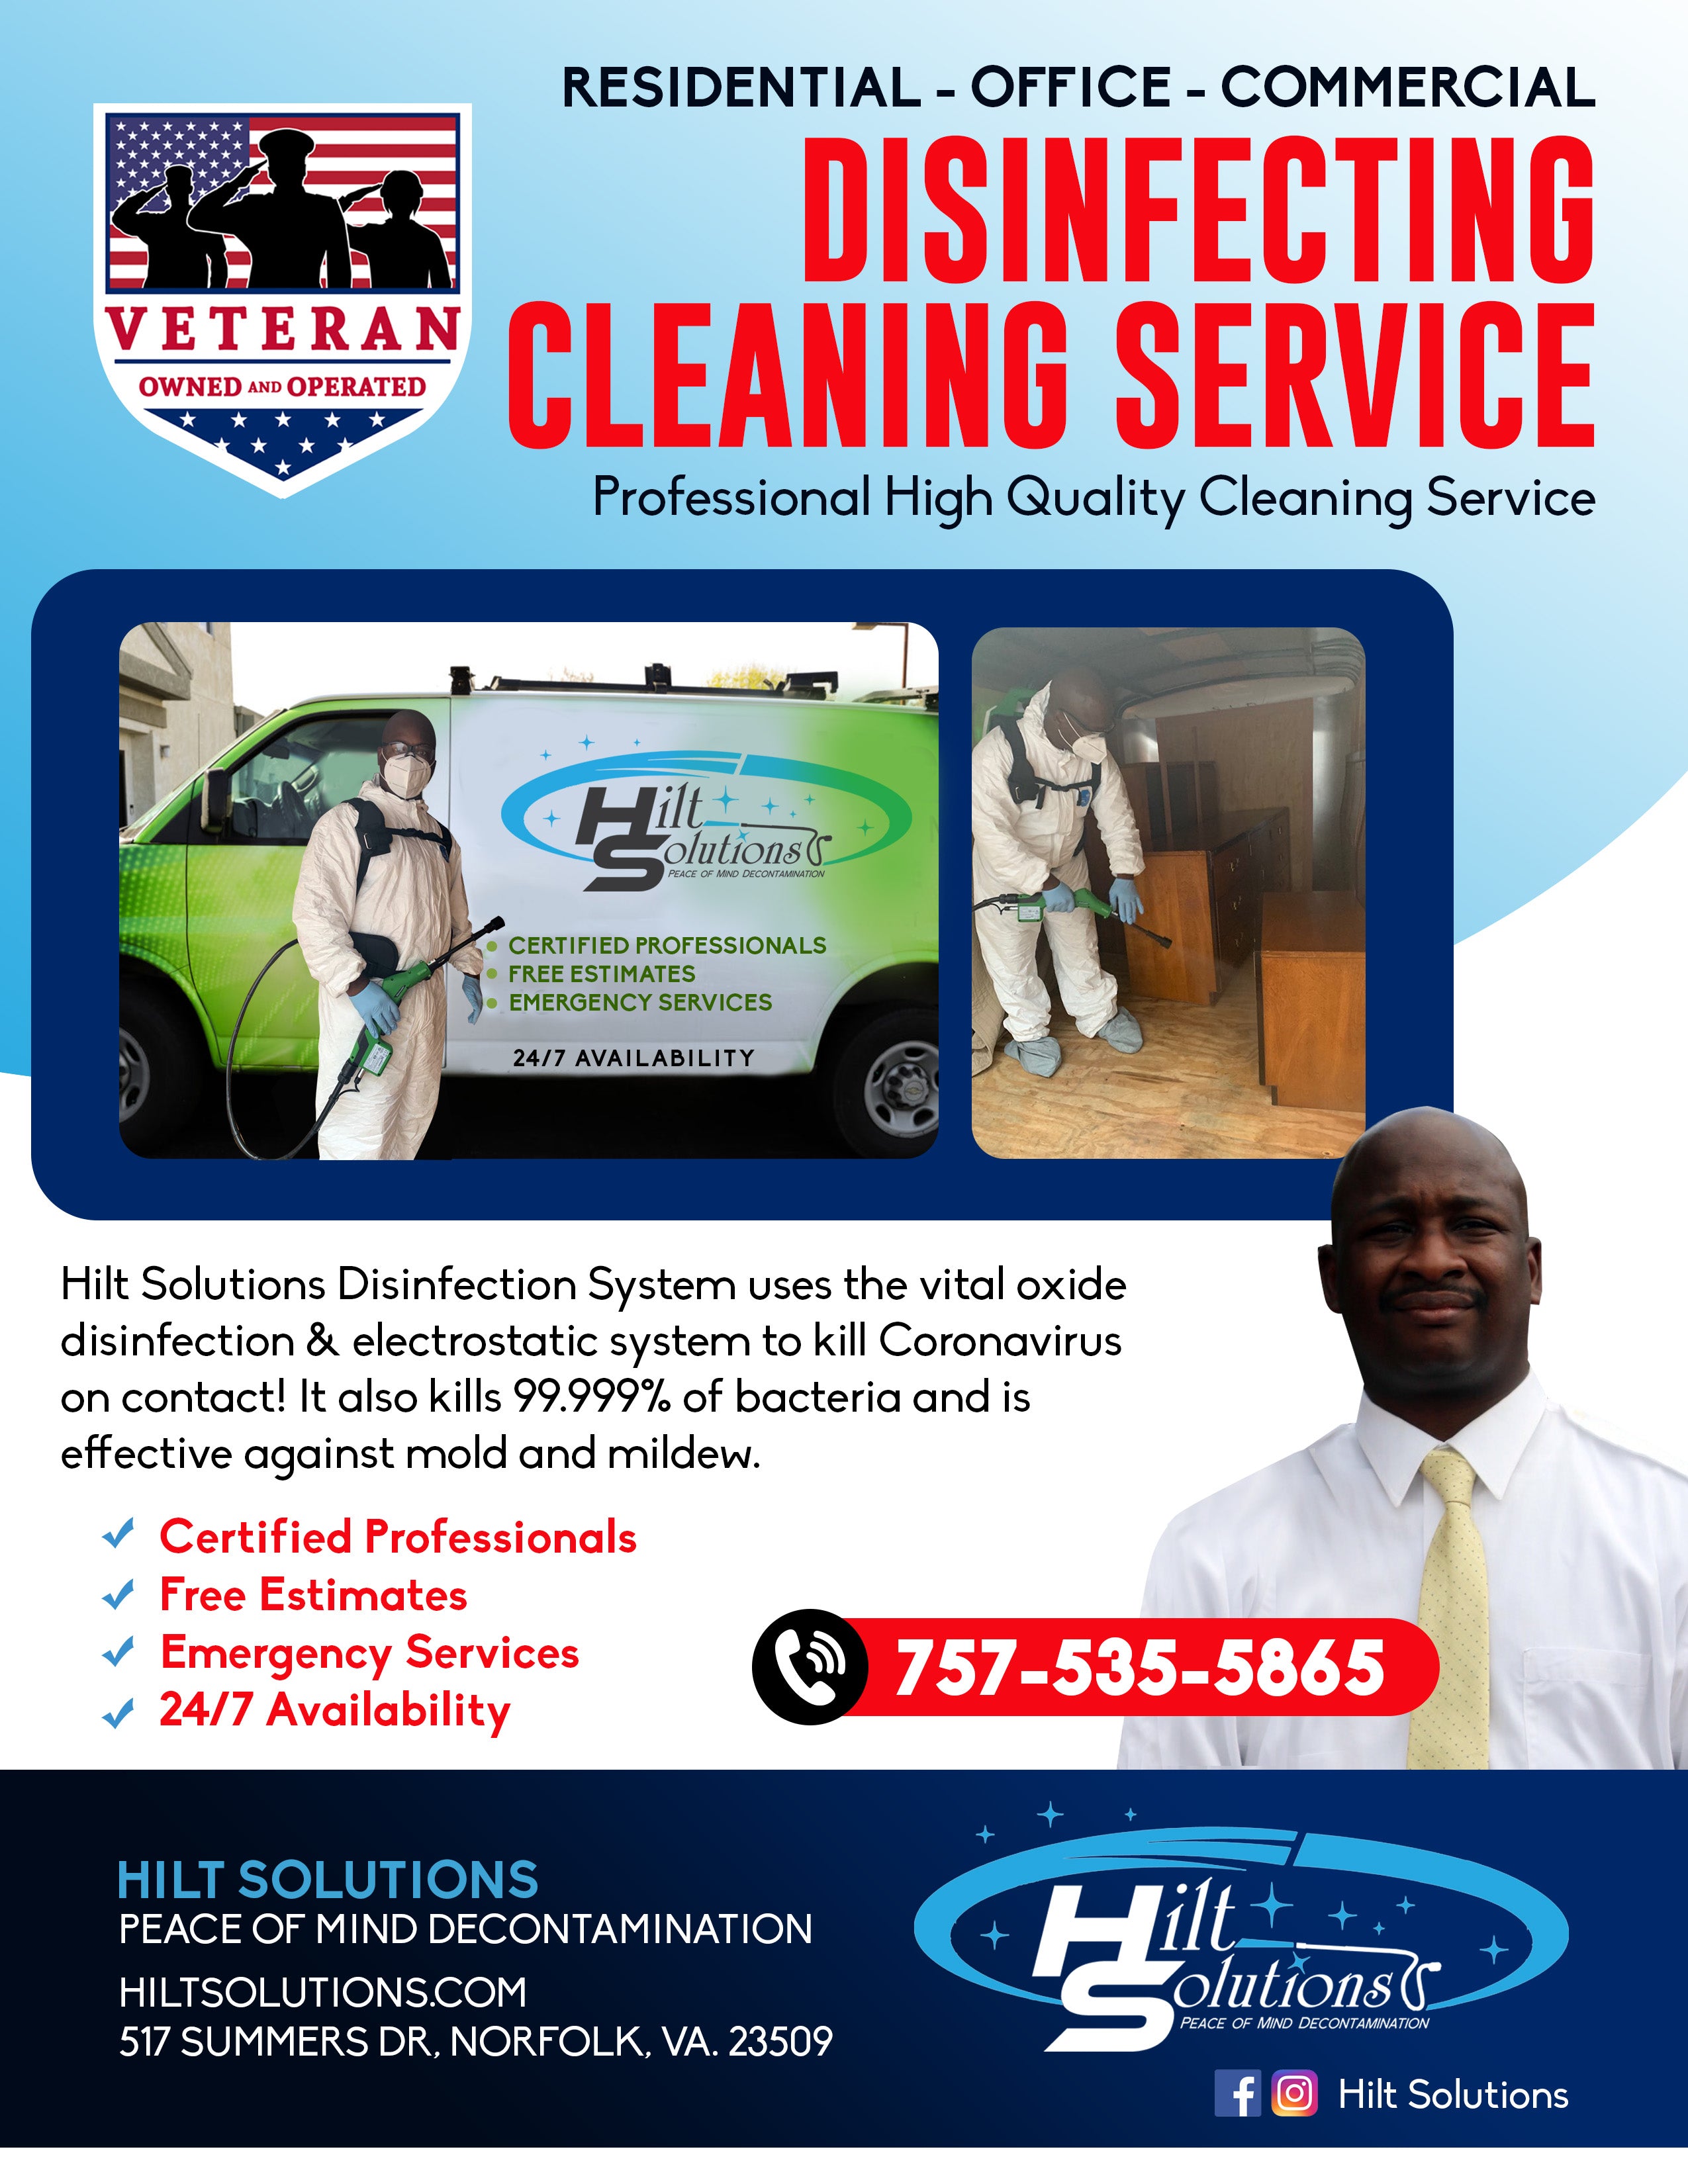 RESIDENTIAL Disinfecting Services under 2500sq ft.